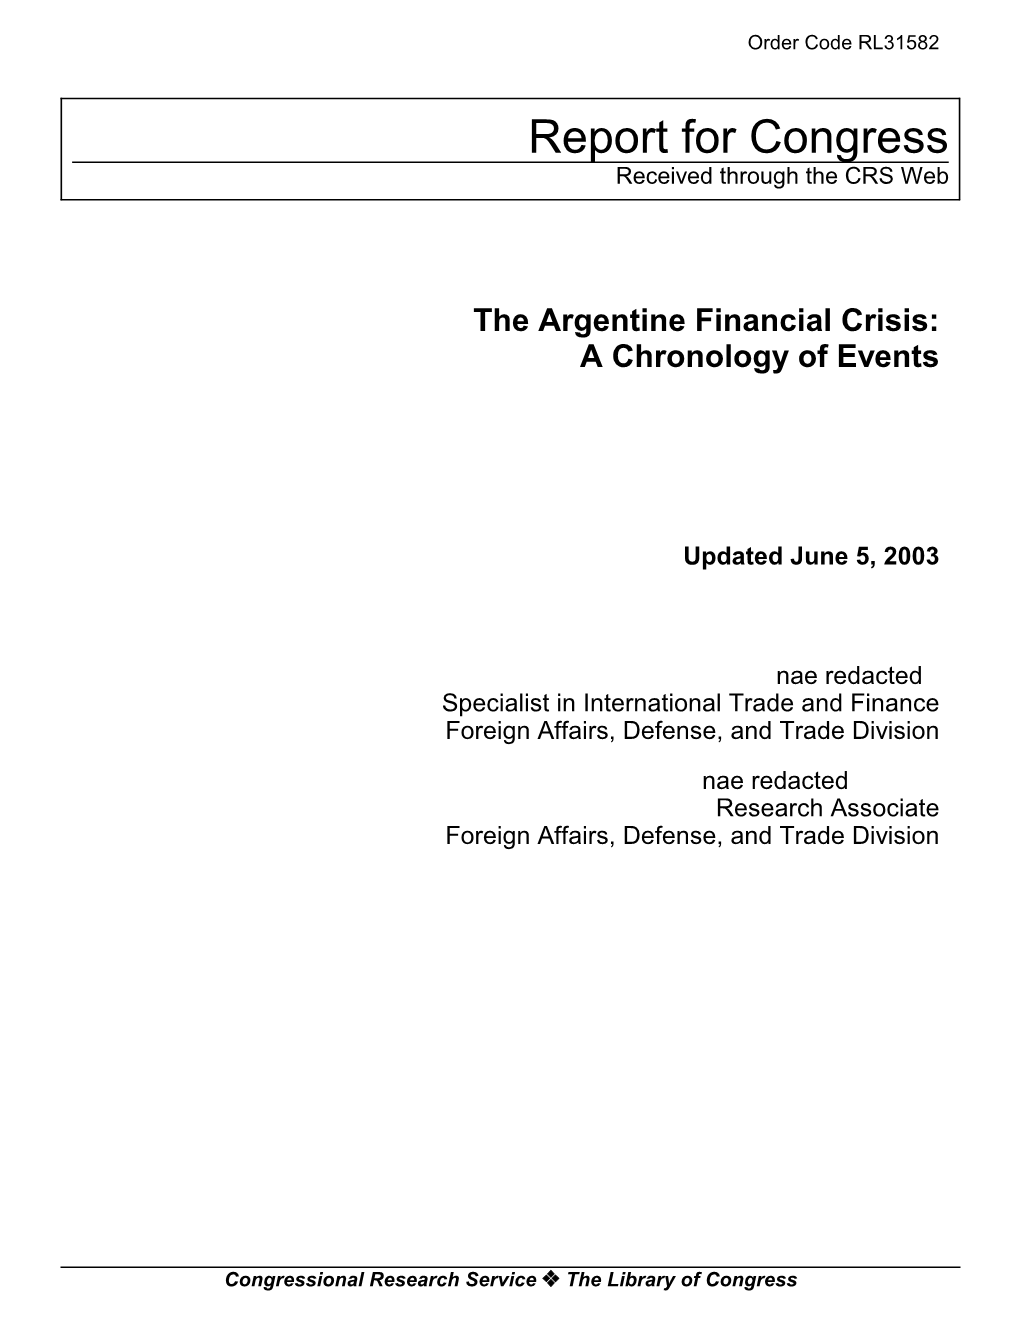 The Argentine Financial Crisis: a Chronology of Events